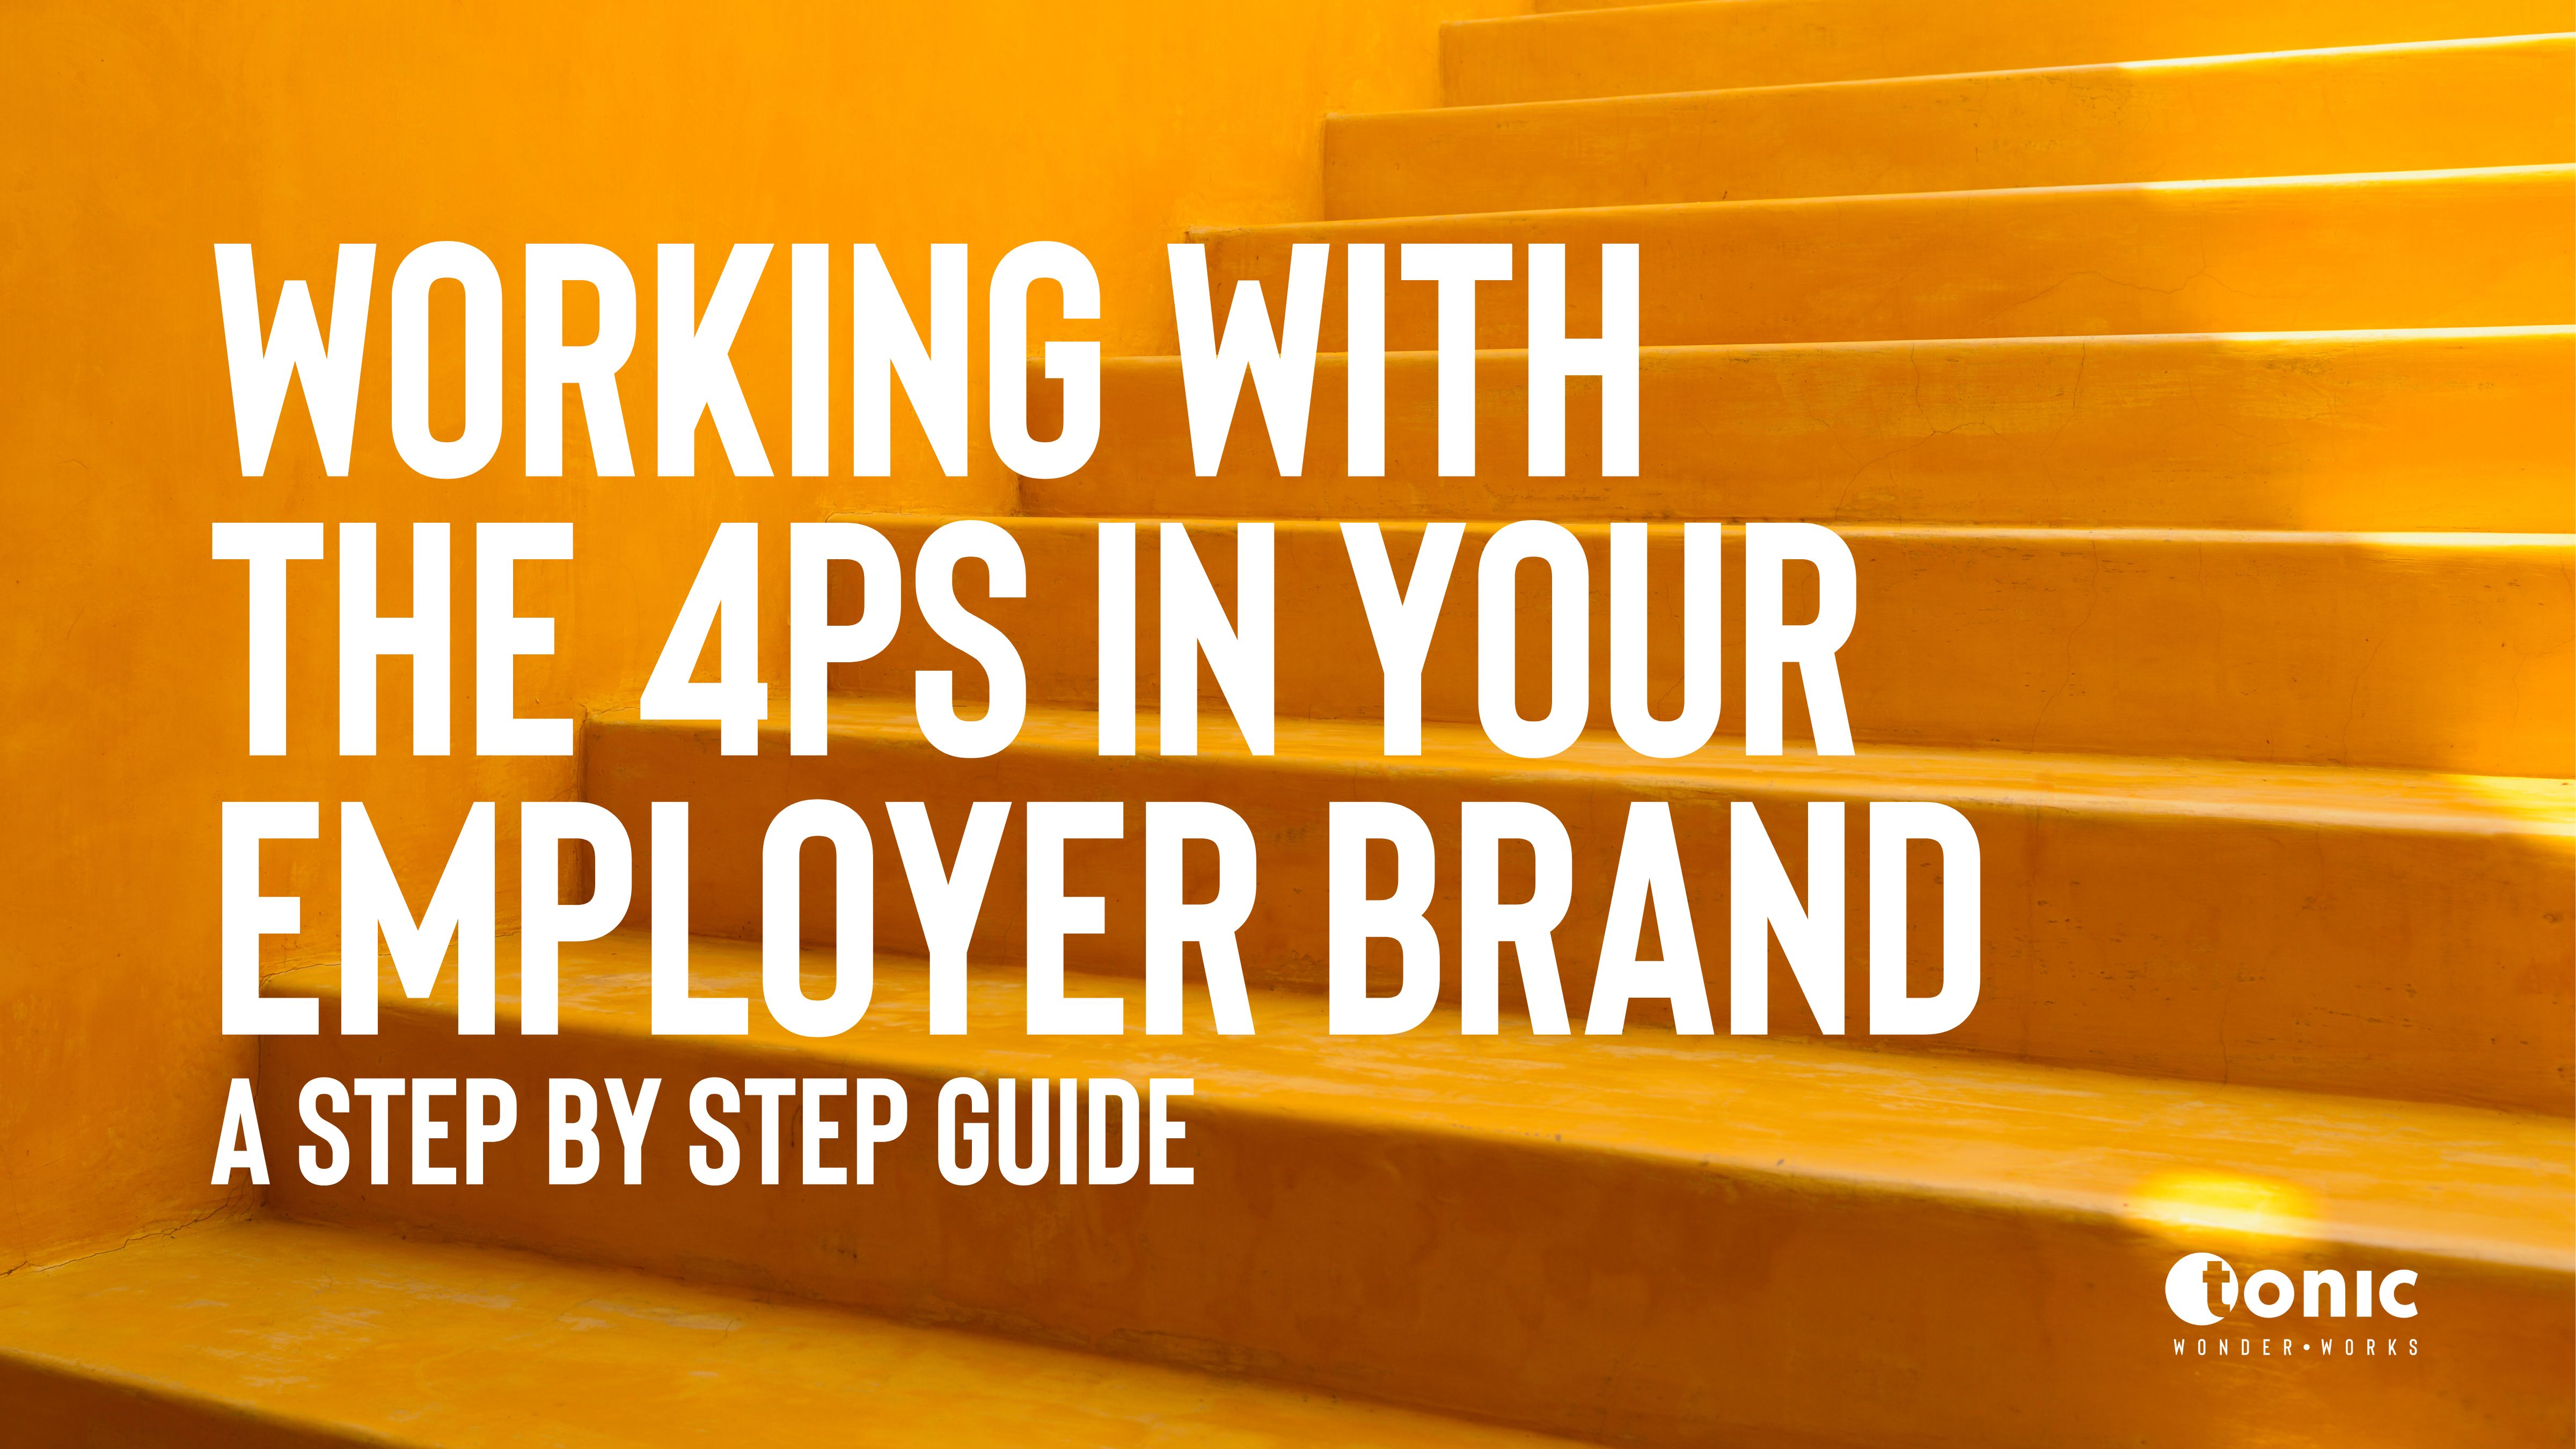 A Step-by-Step Guide to Working with the 4P's in your Employer Brand